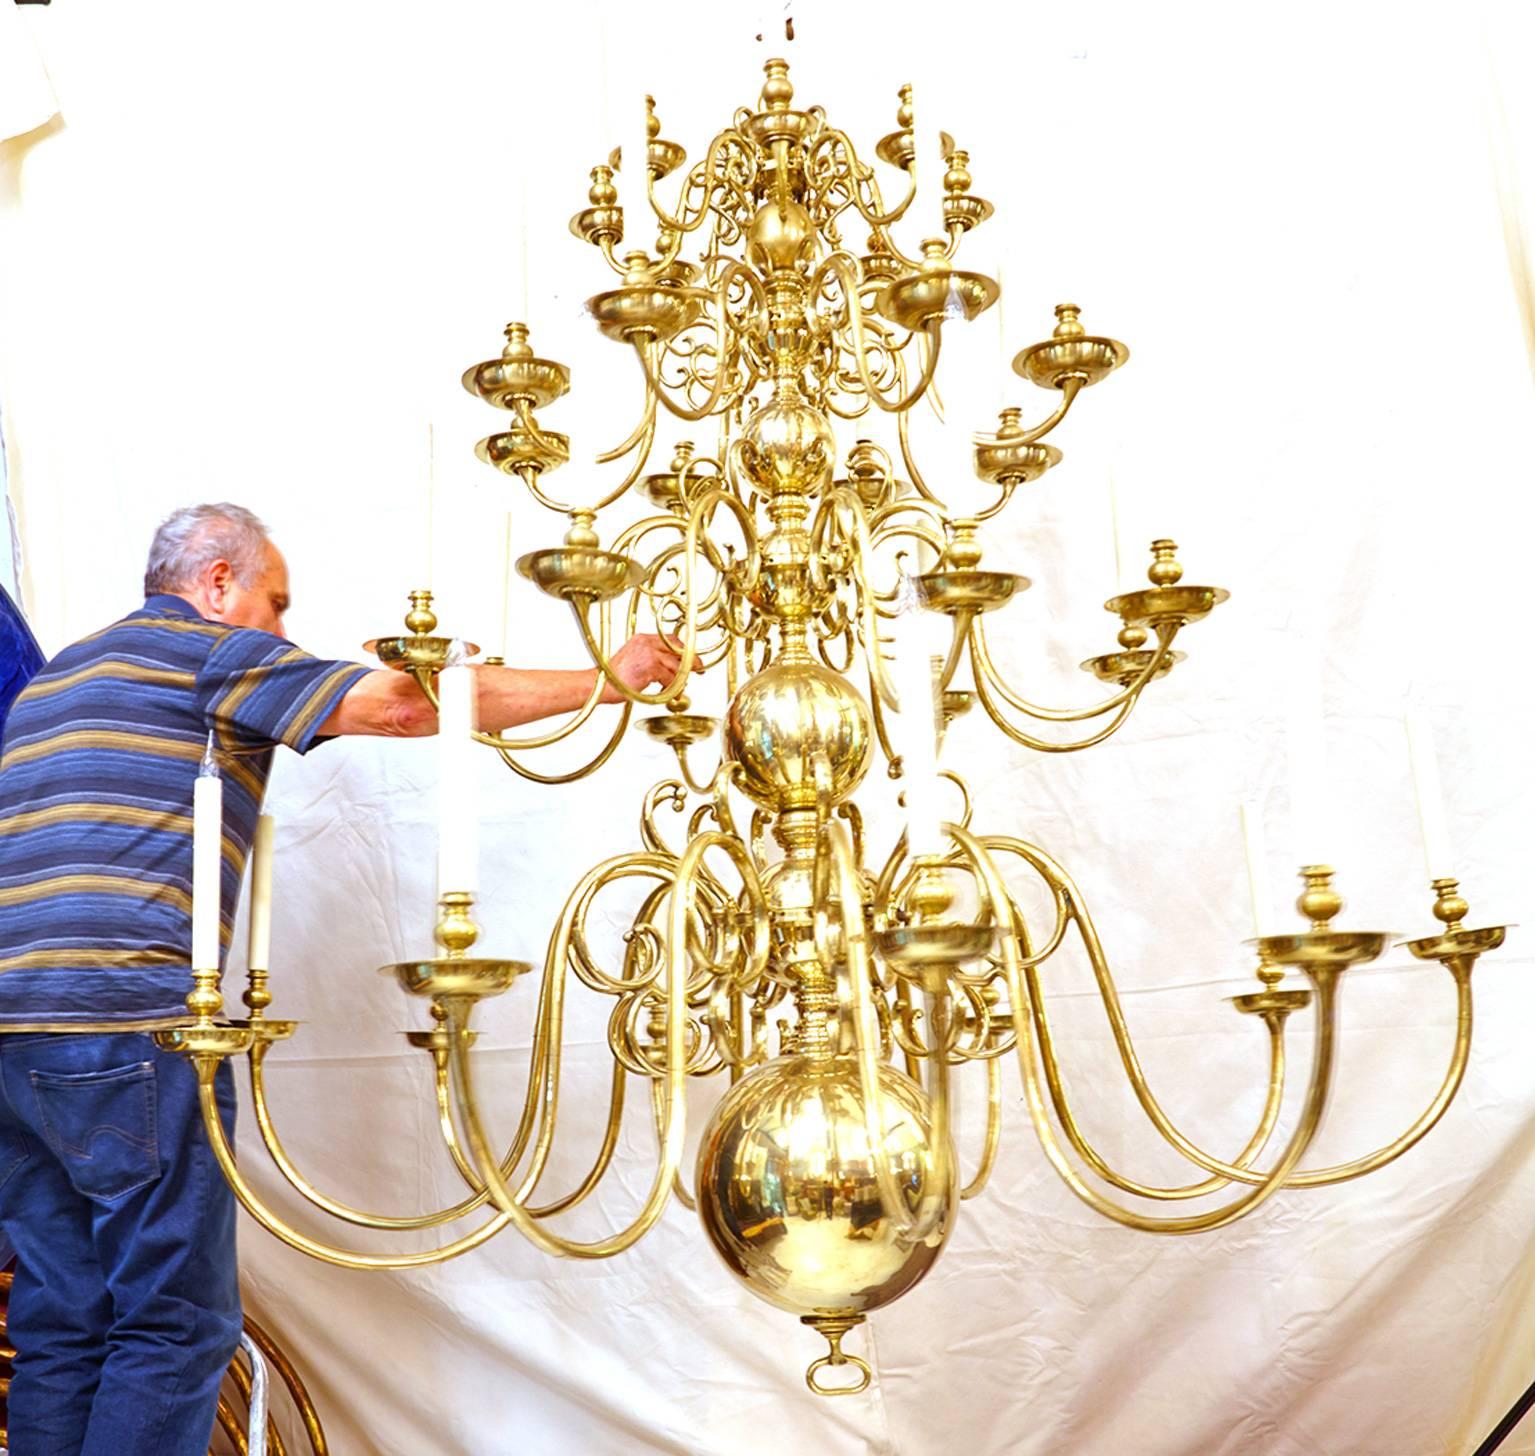 Monumental Dutch chandelier in solid brass to 1880-1900.
Originally it was with wax candles.
Electrification made posteriorly, redone with large candles and flames bulbs.
34 lights.